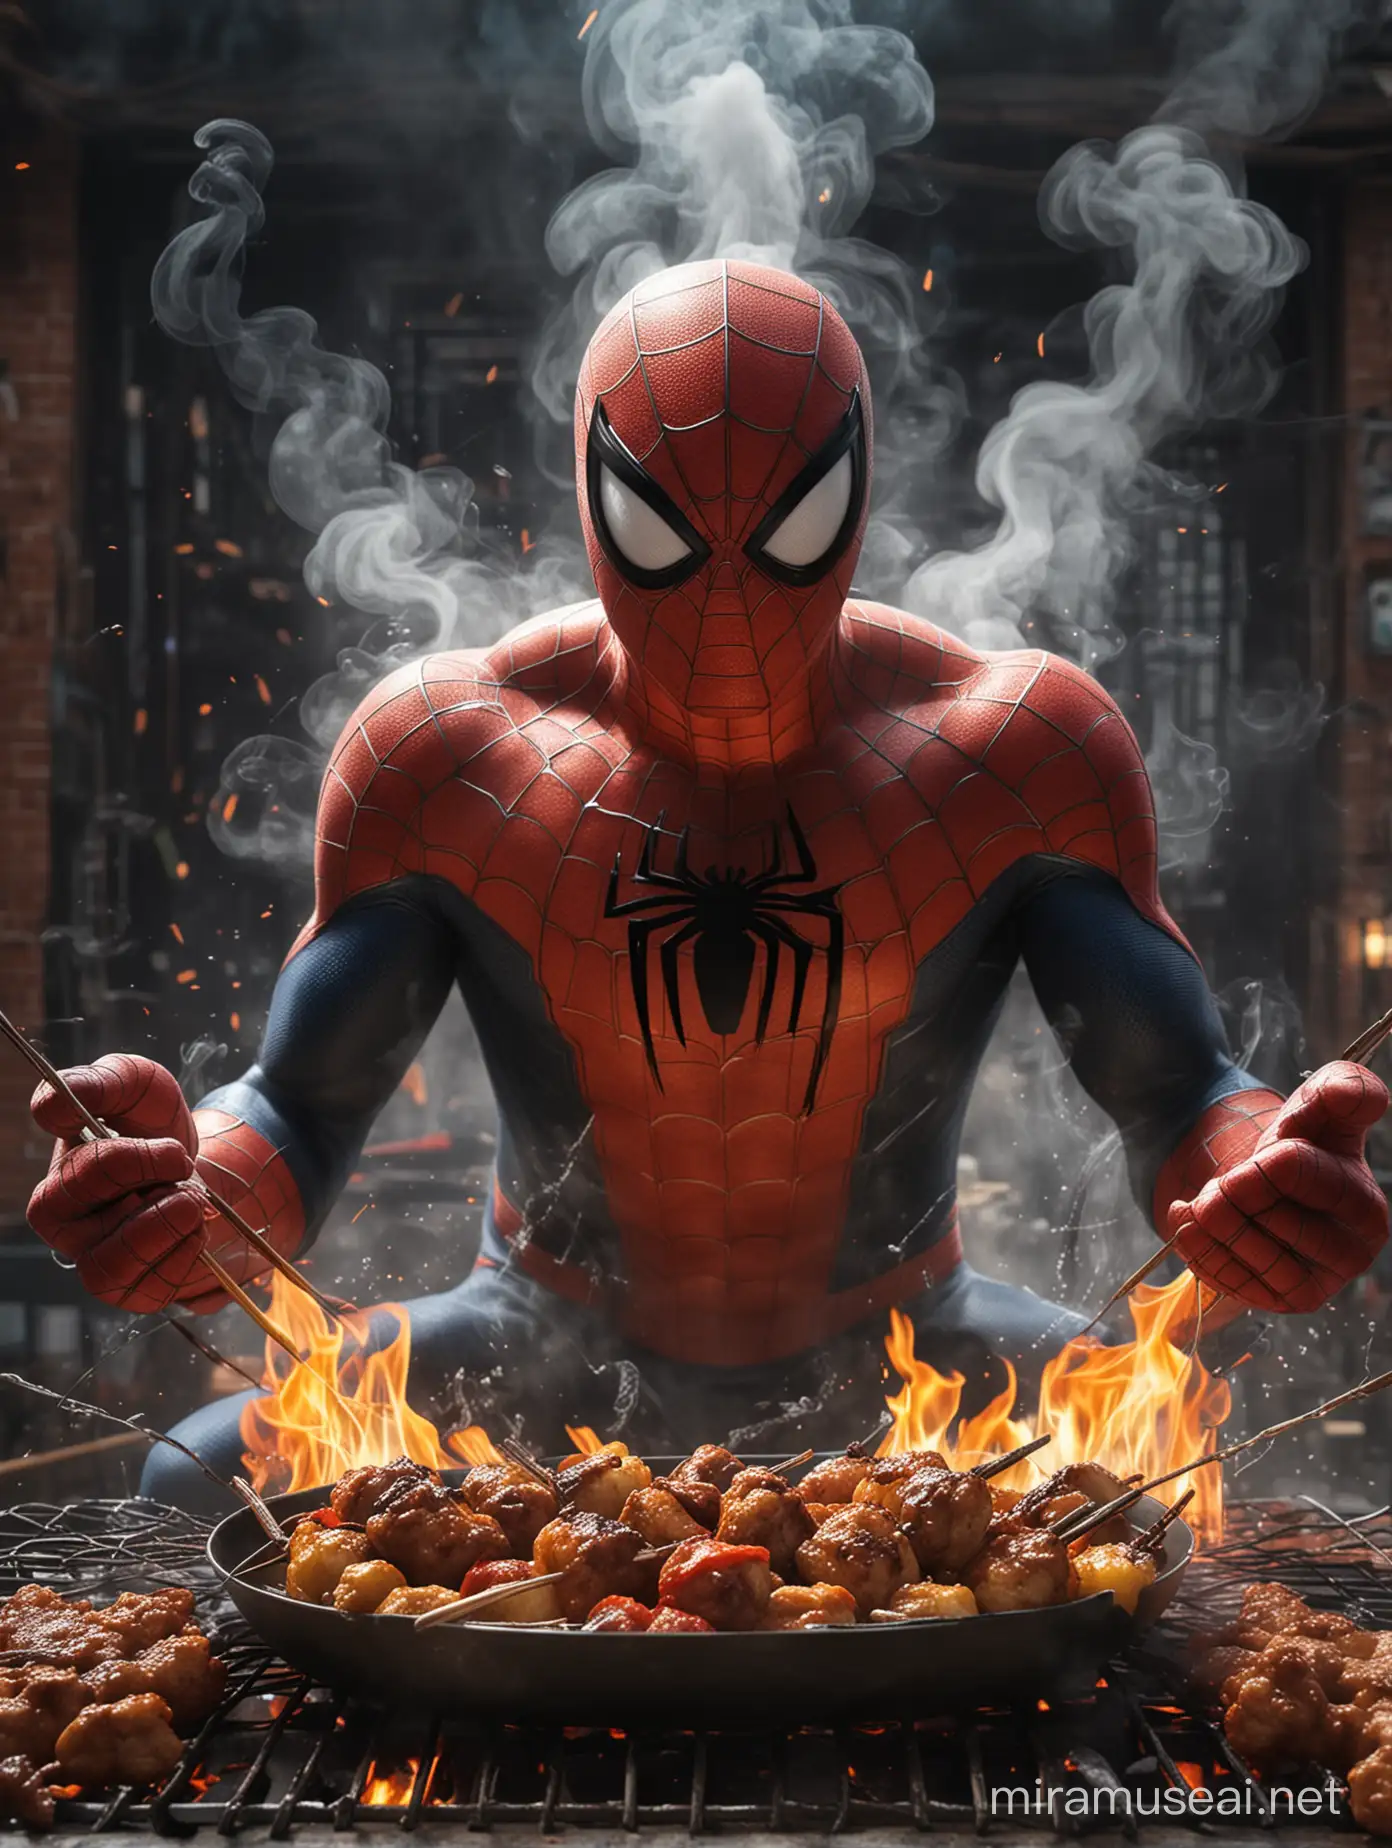 Spiderman Grilling Satay with Dramatic Smoke Effect